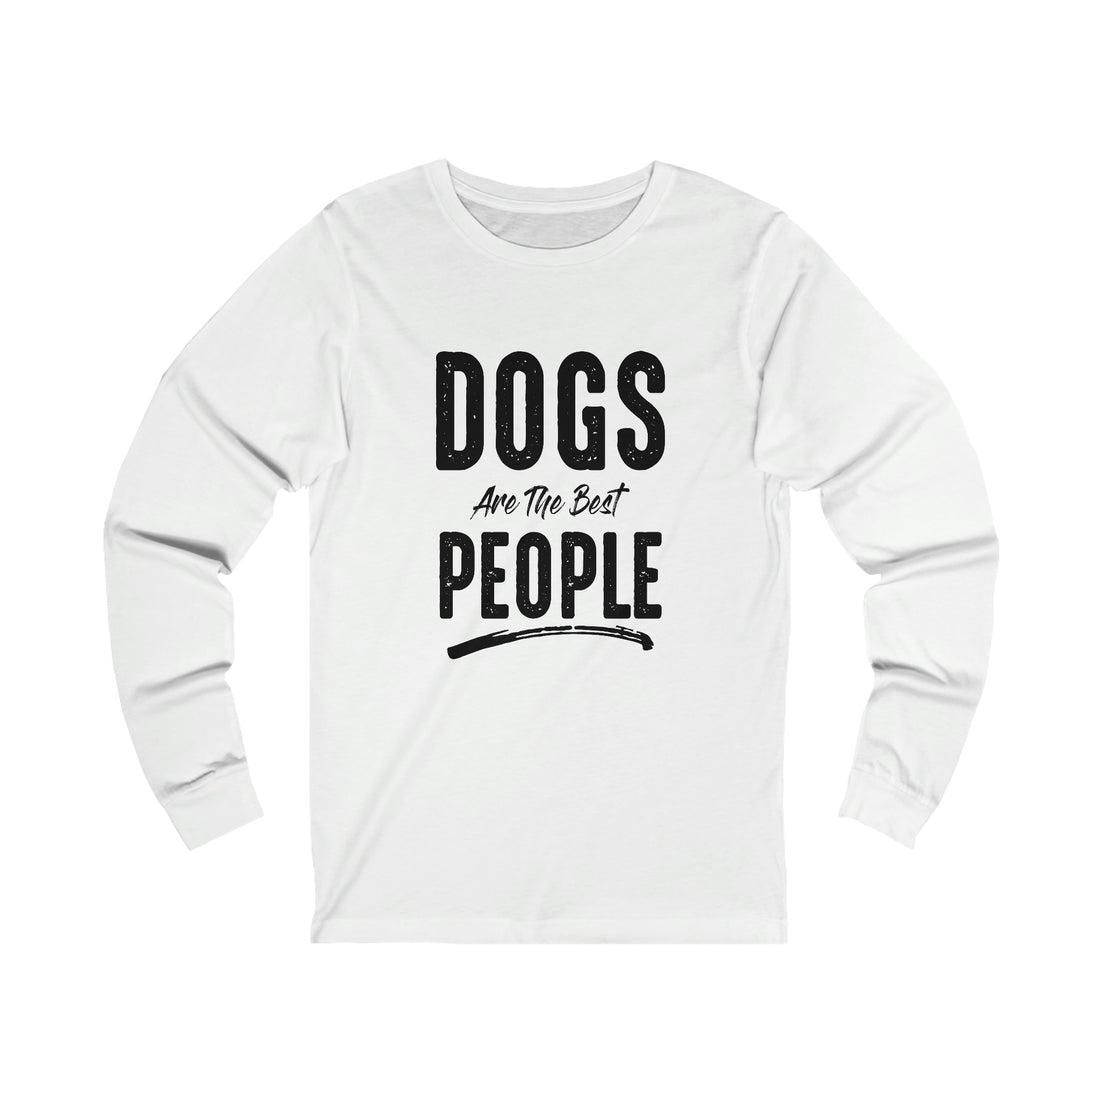 Dogs Are The Best People - Unisex Jersey Long Sleeve Tee